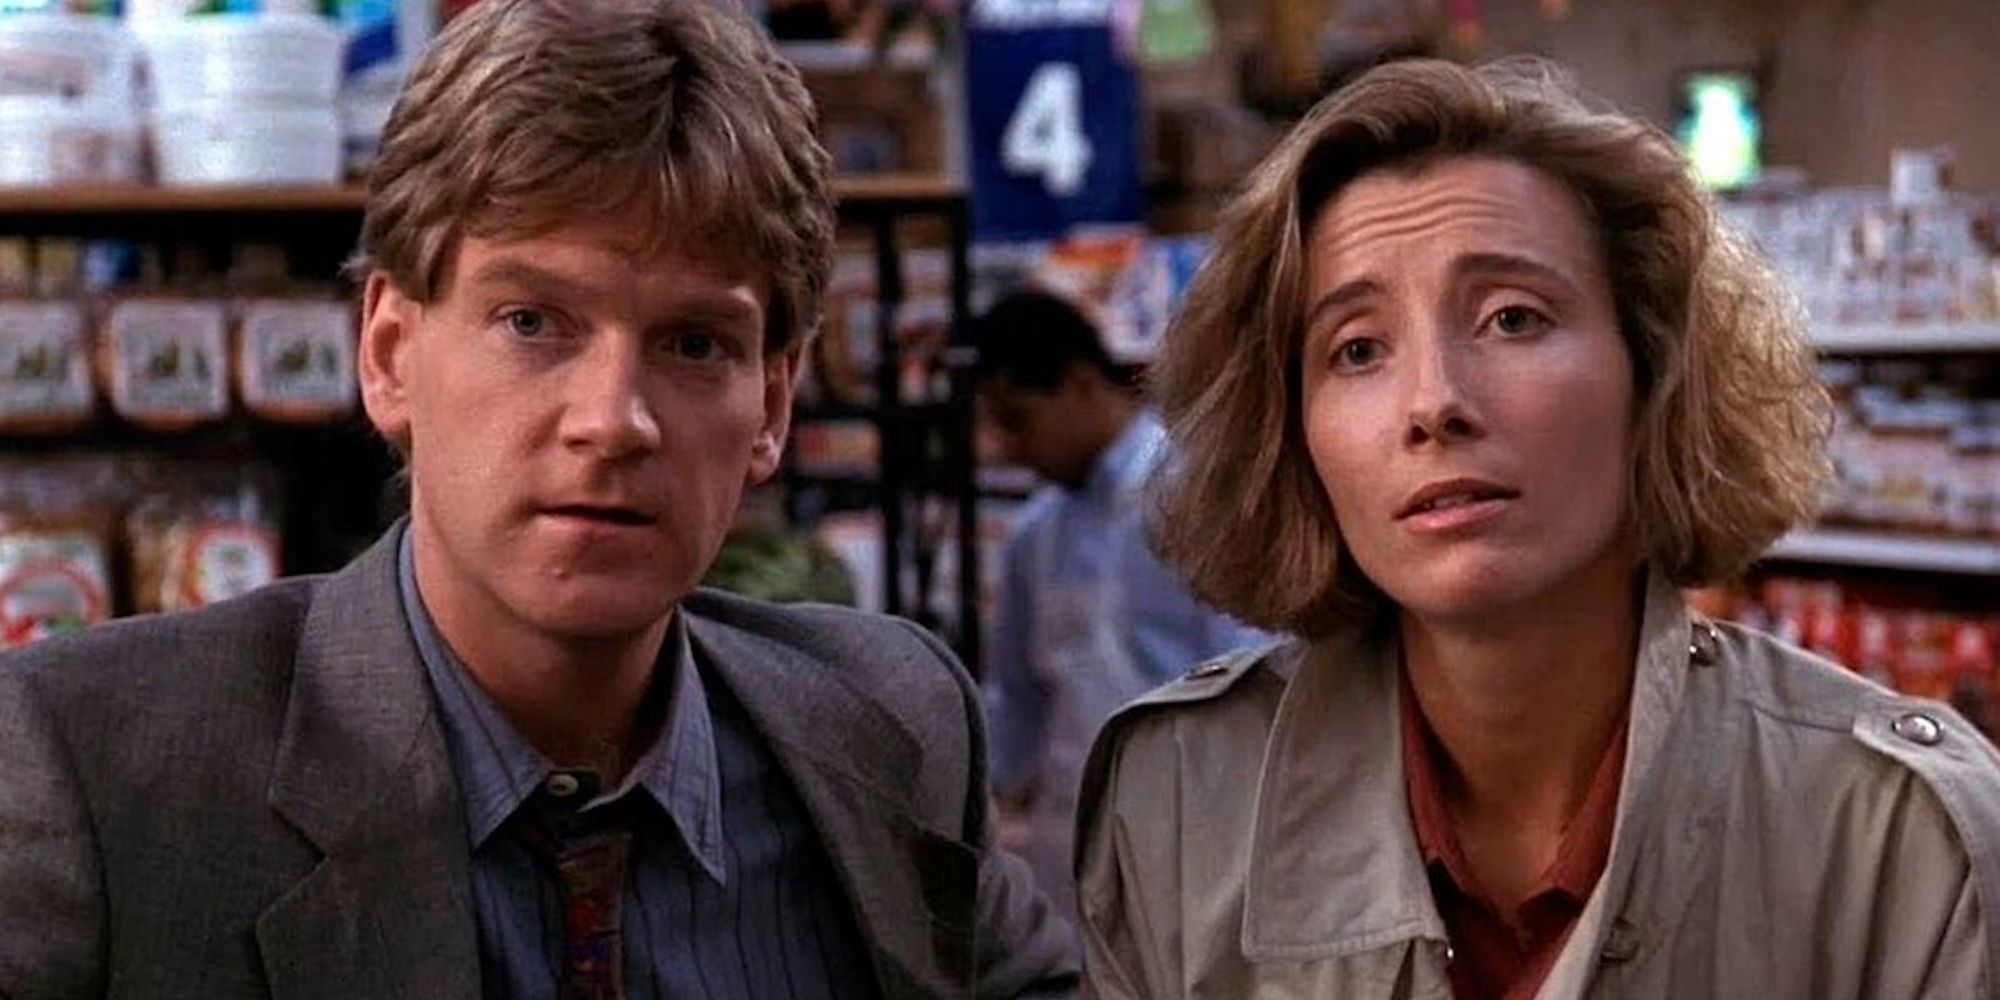 Kenneth Branagh and Emma Thompson as Roman and Margaret looking confused in Dead Again